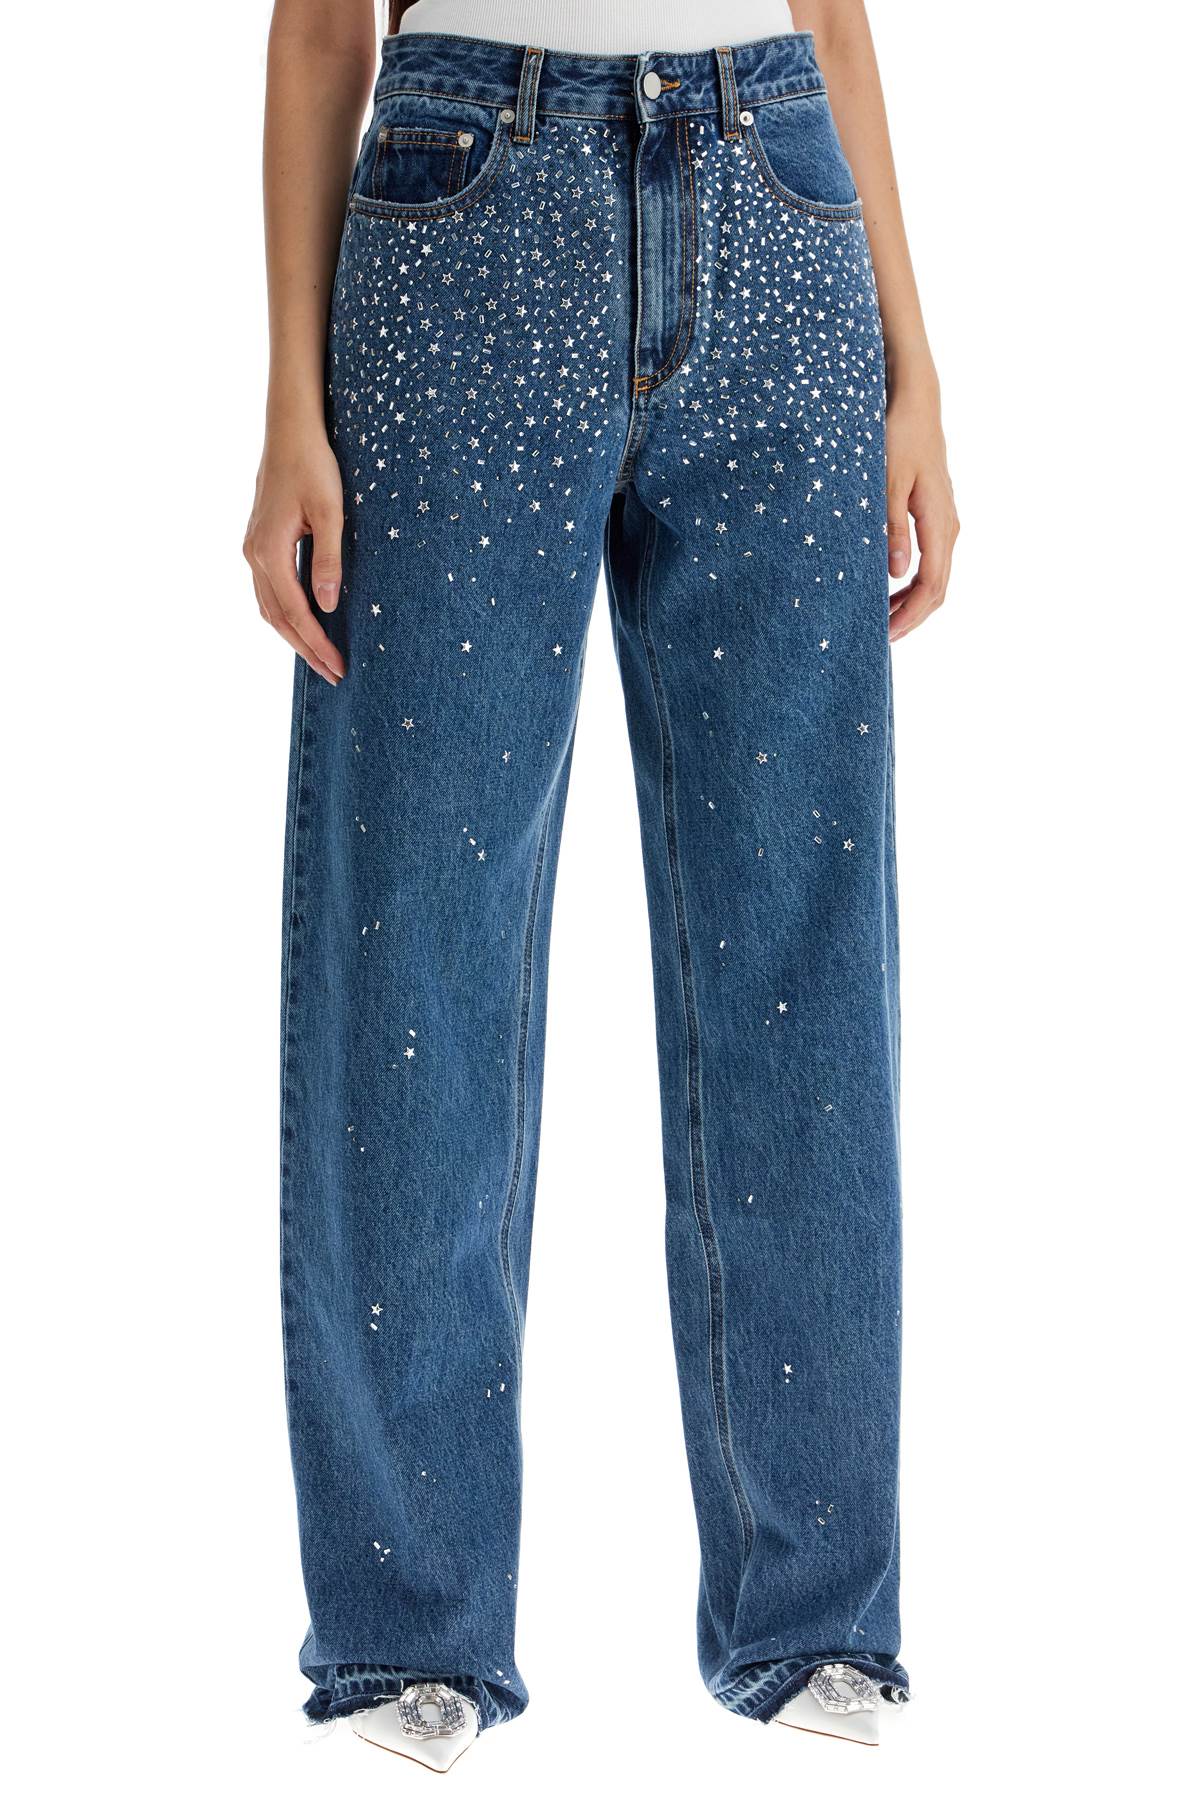 Alessandra Rich Baggy Jeans With Applique   Blue